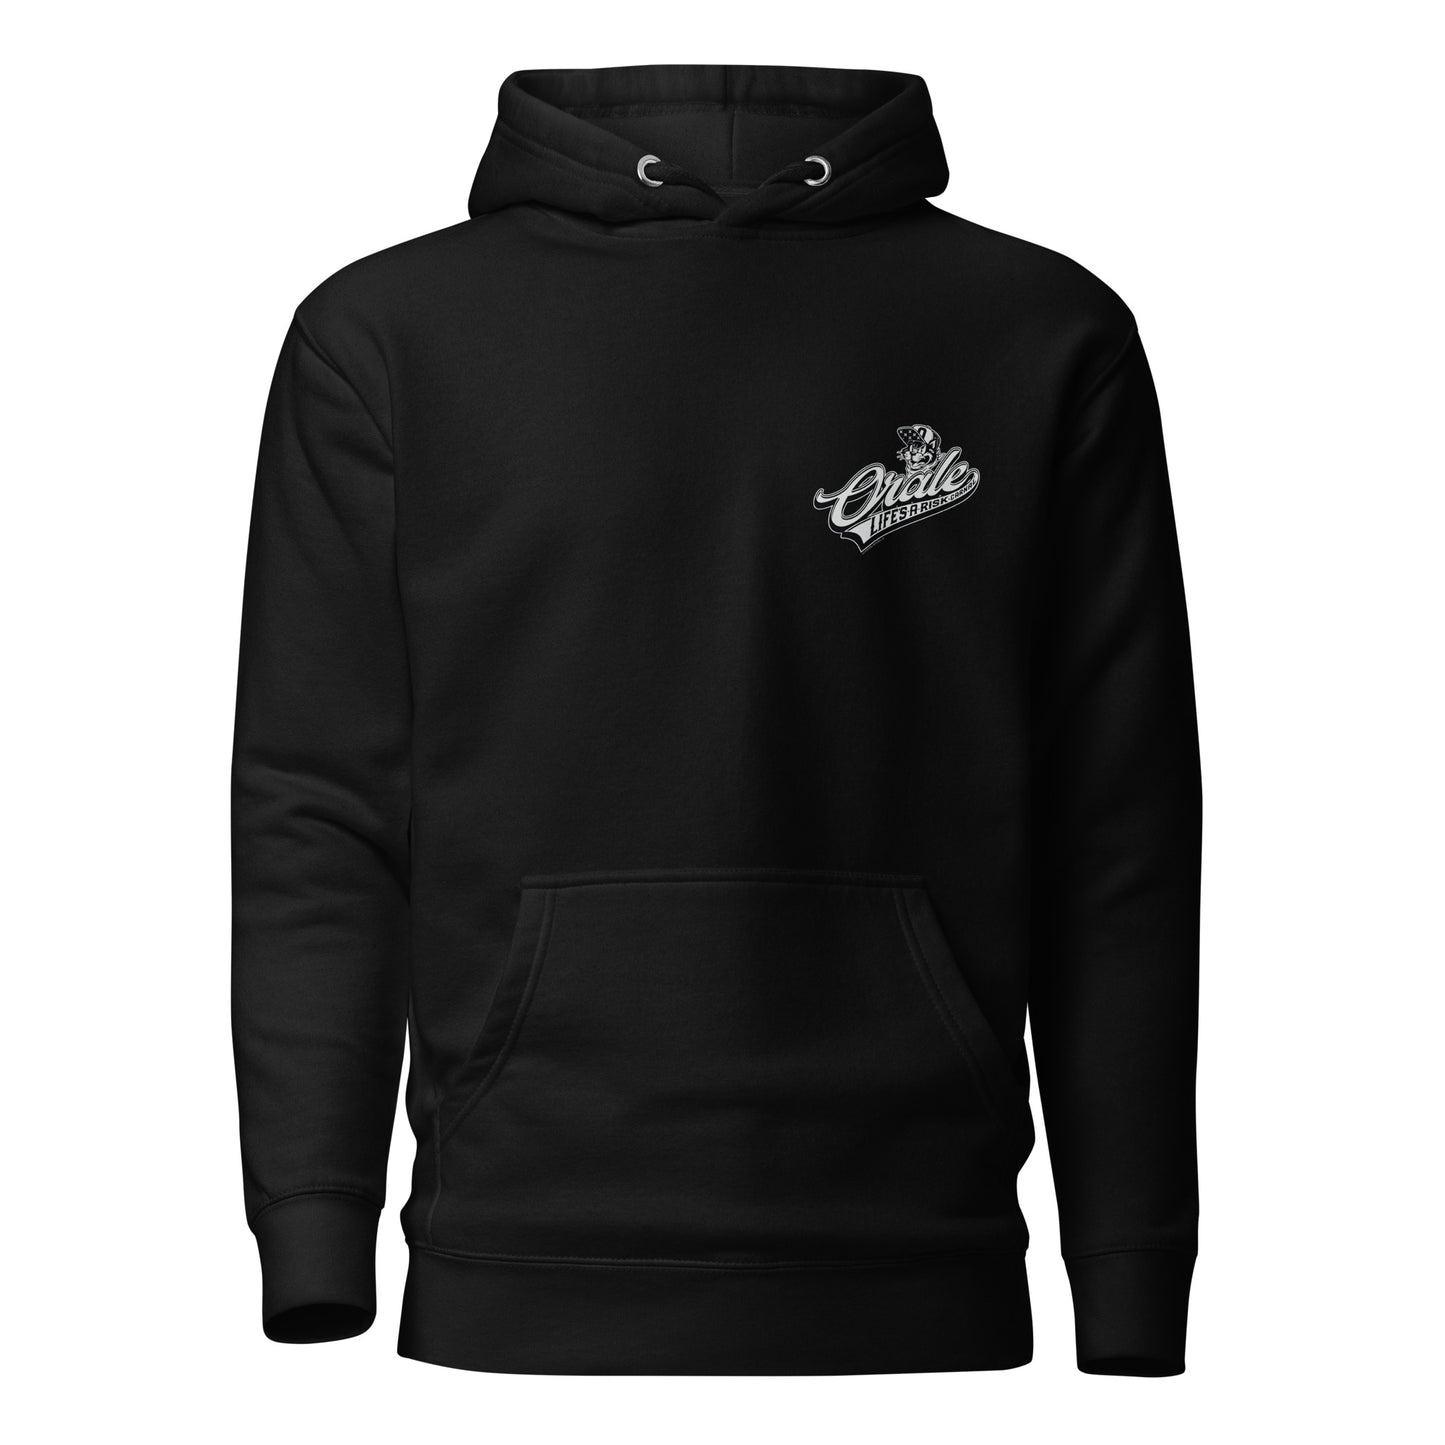 Premium hoodie featuring white graphic, comfortable and firme for carnales.